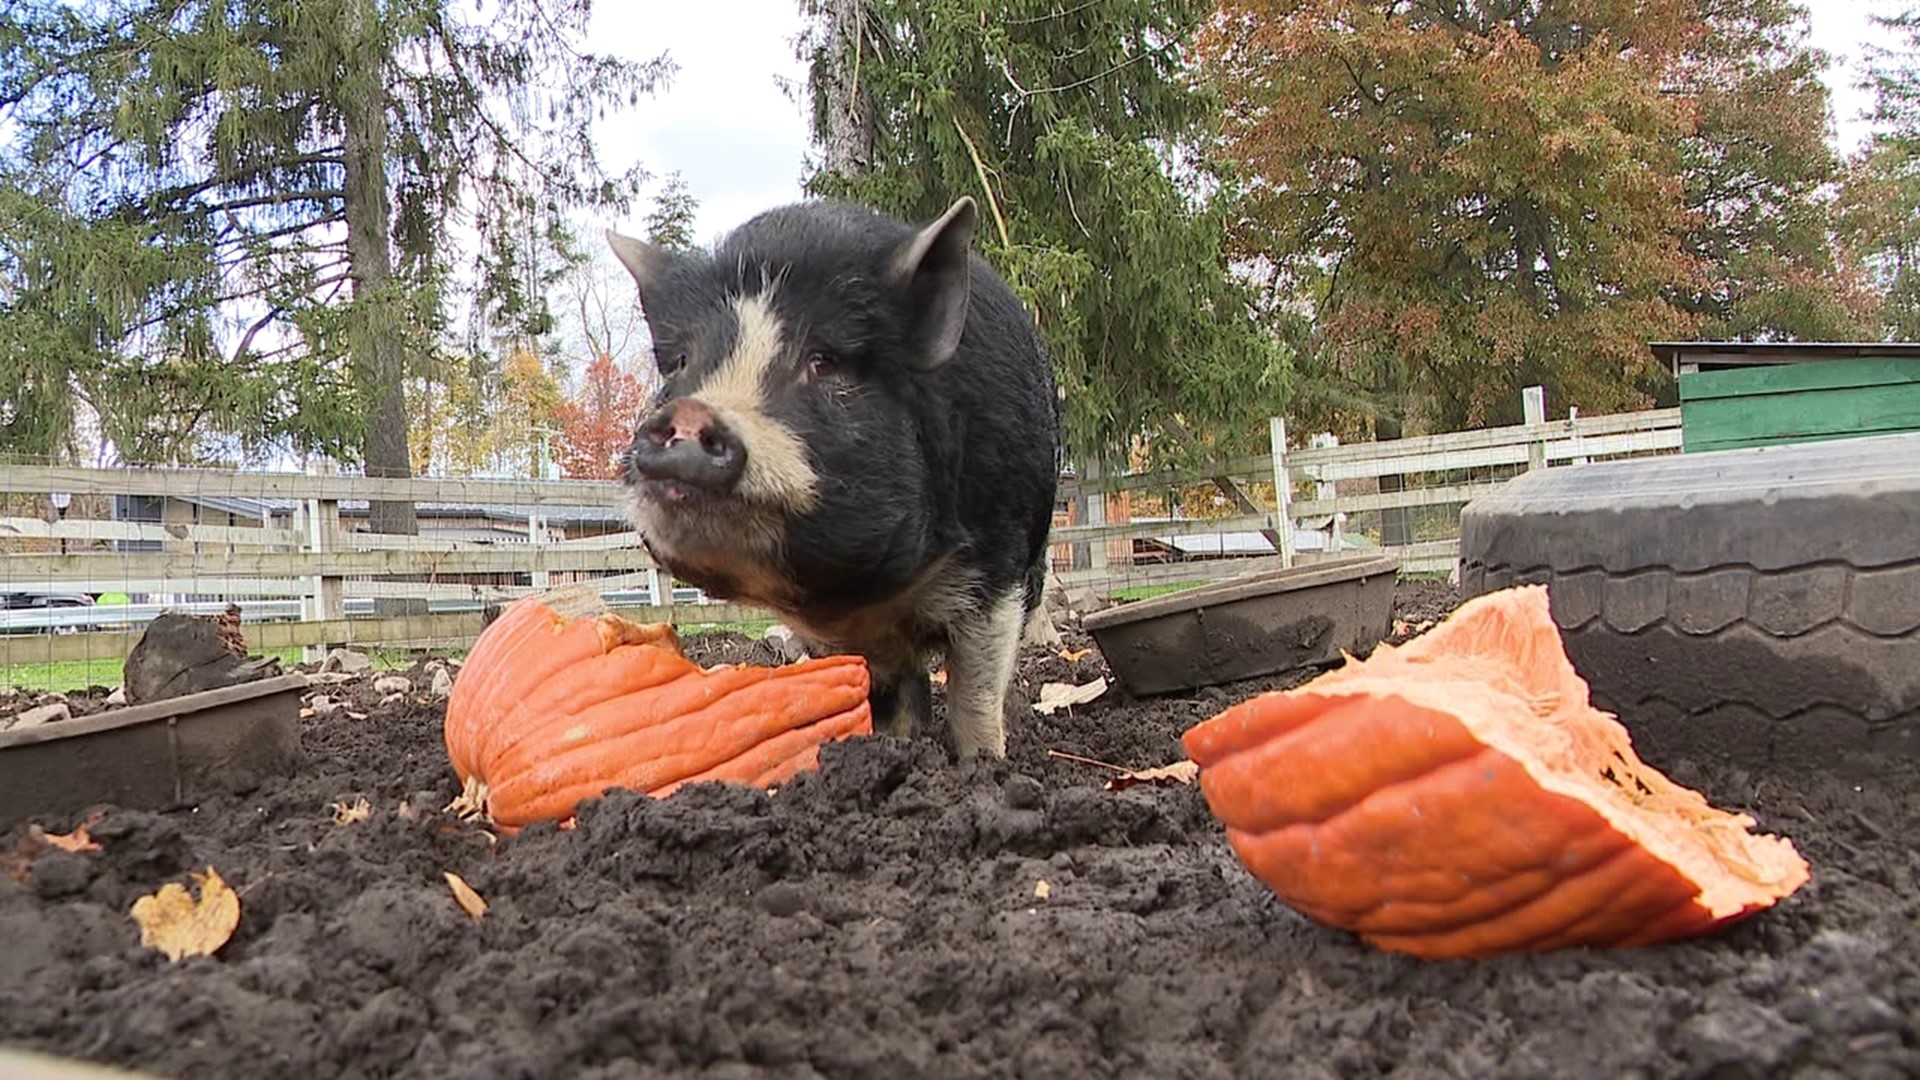 If you're looking to re-purpose your pumpkins Newswatch 16's Emily Kress tells us how you can help treat some farm animals in Luzerne County.